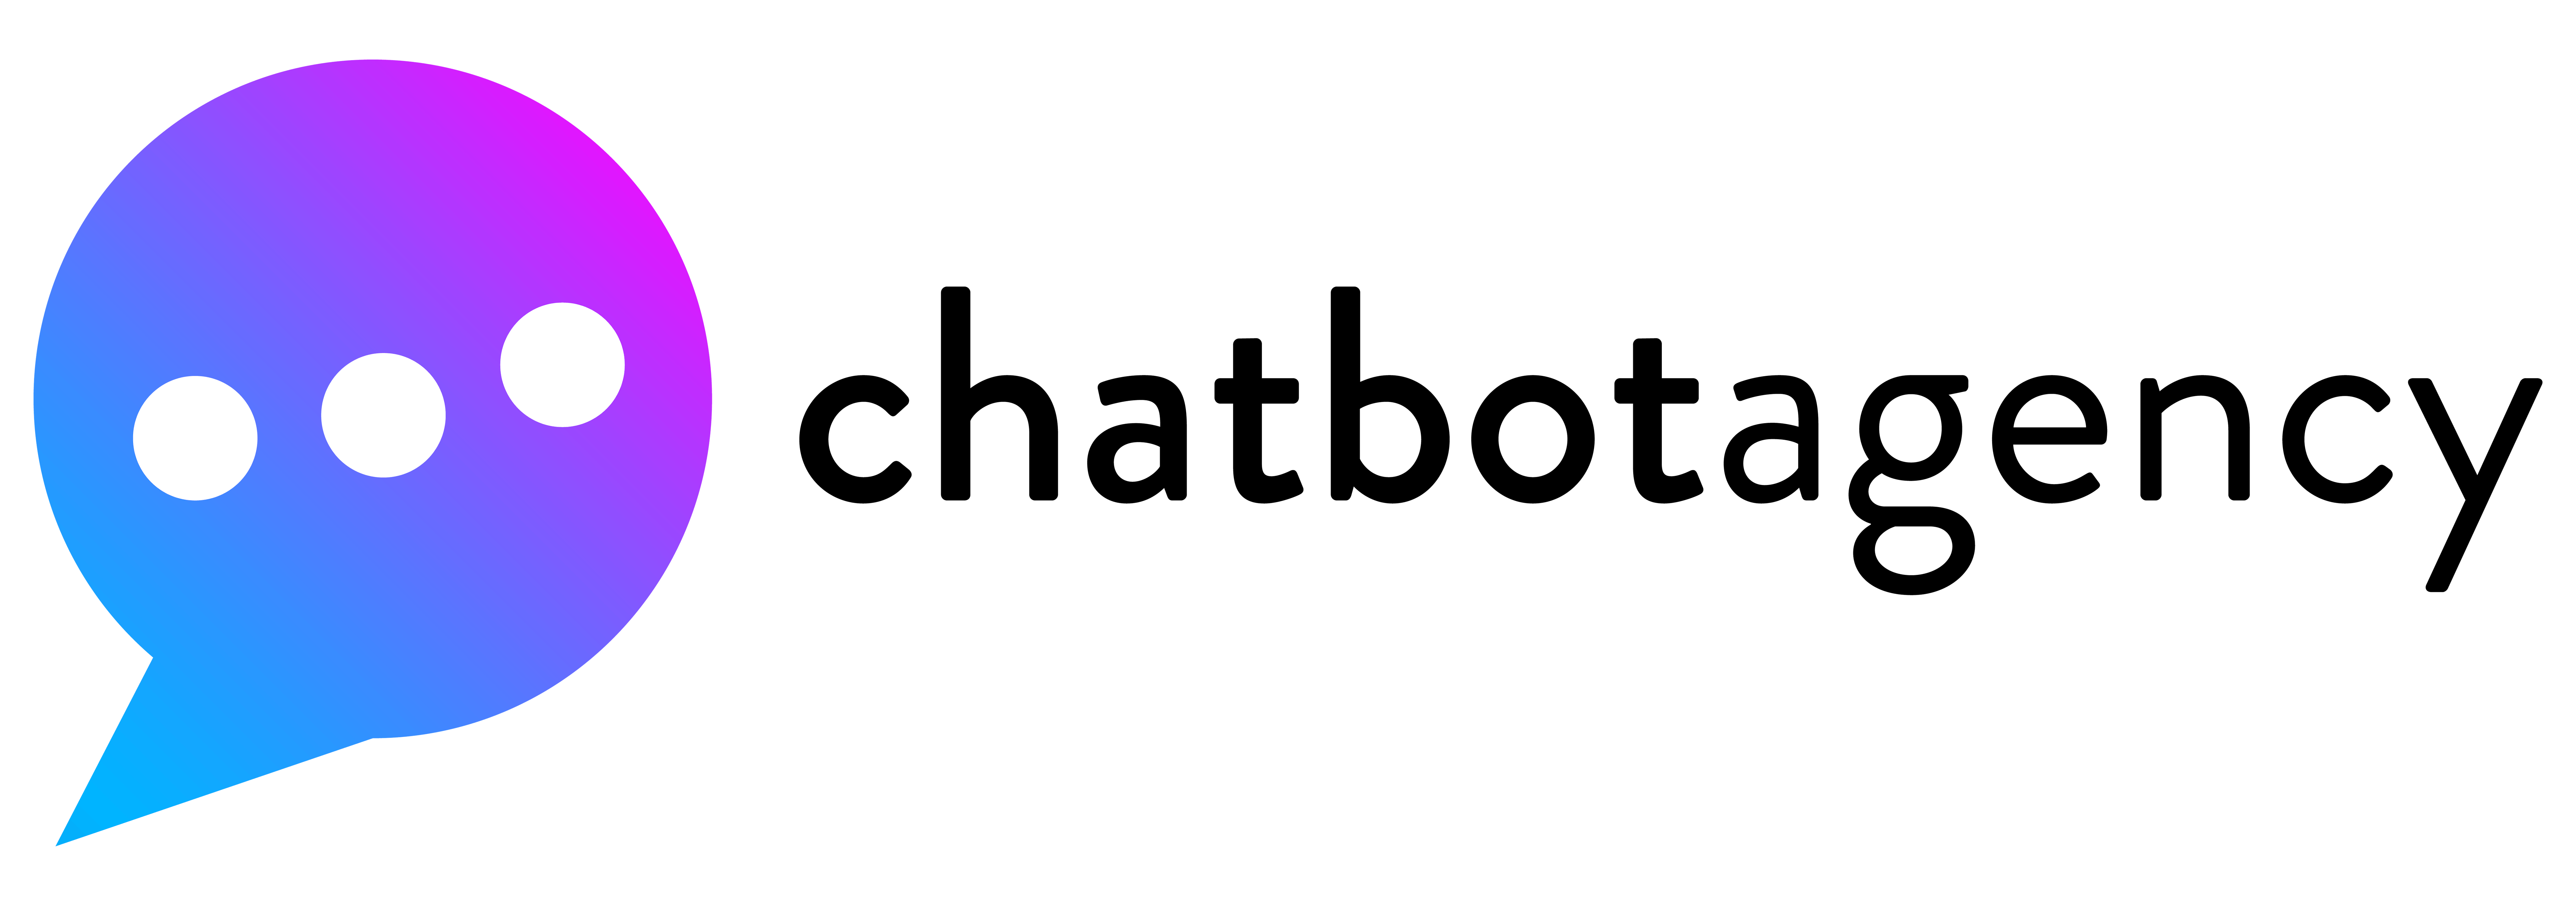 Chatbot Demo Templates | Chatbot Agency